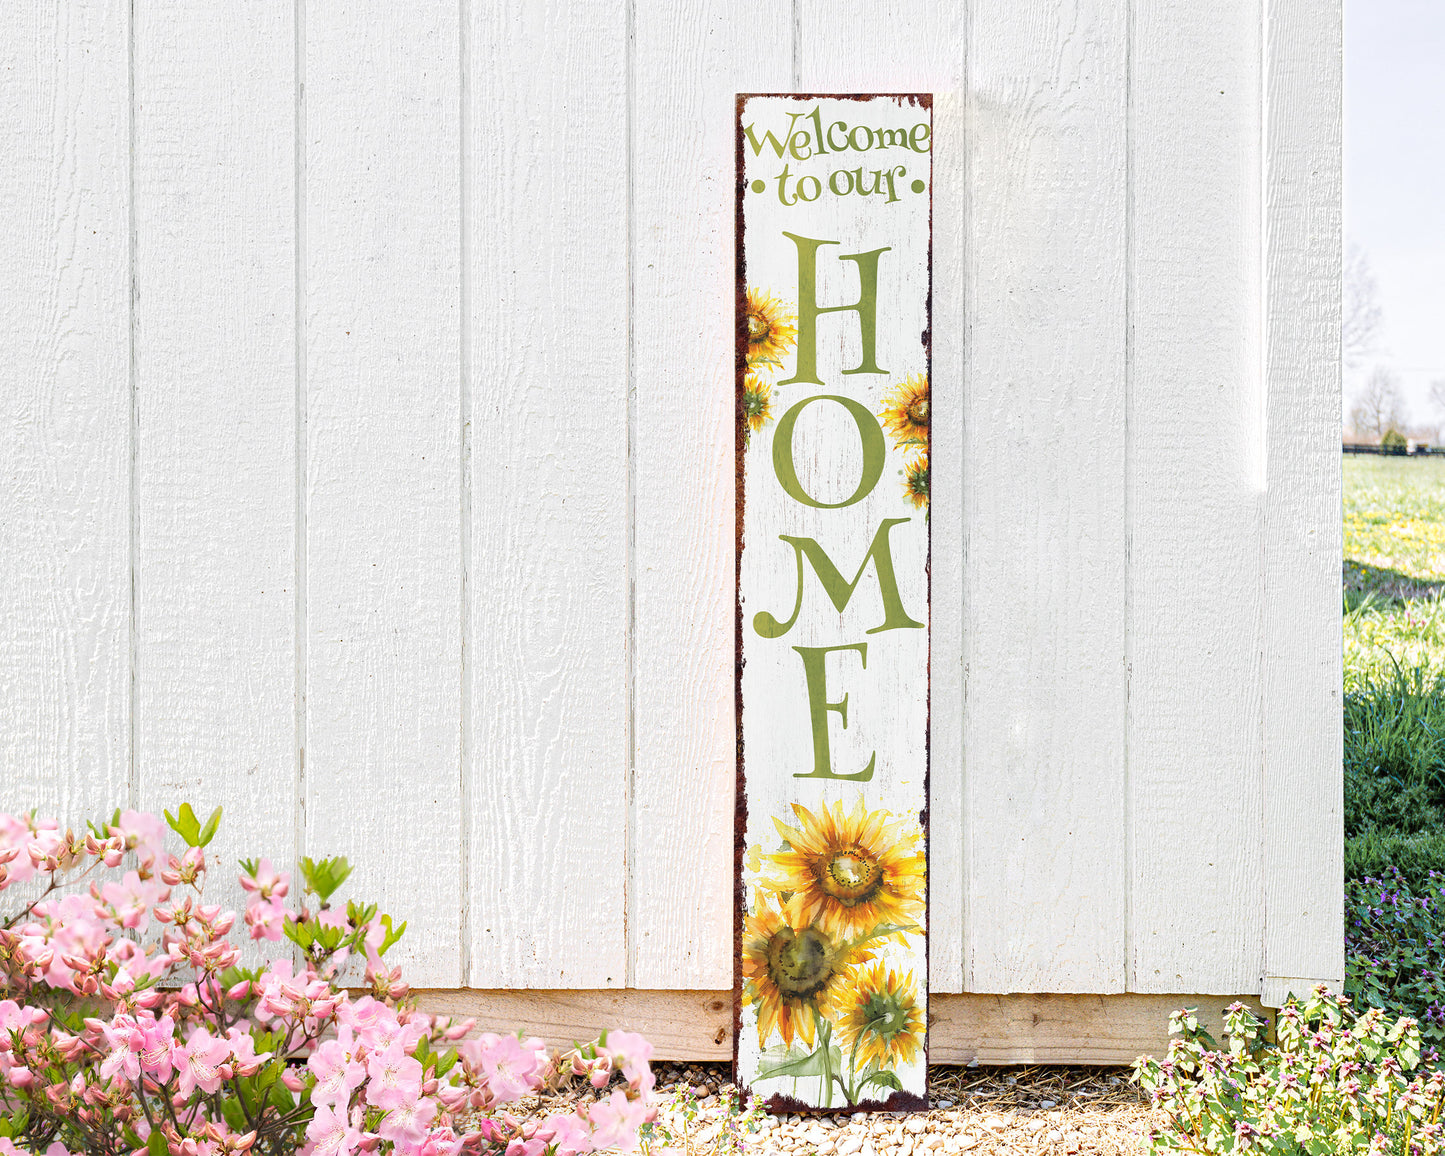 48in "Welcome to Our Home" Sunflower Porch Sign - Summer Watercolor Design - Rustic Farmhouse Decor for Door, Wall, Entryway